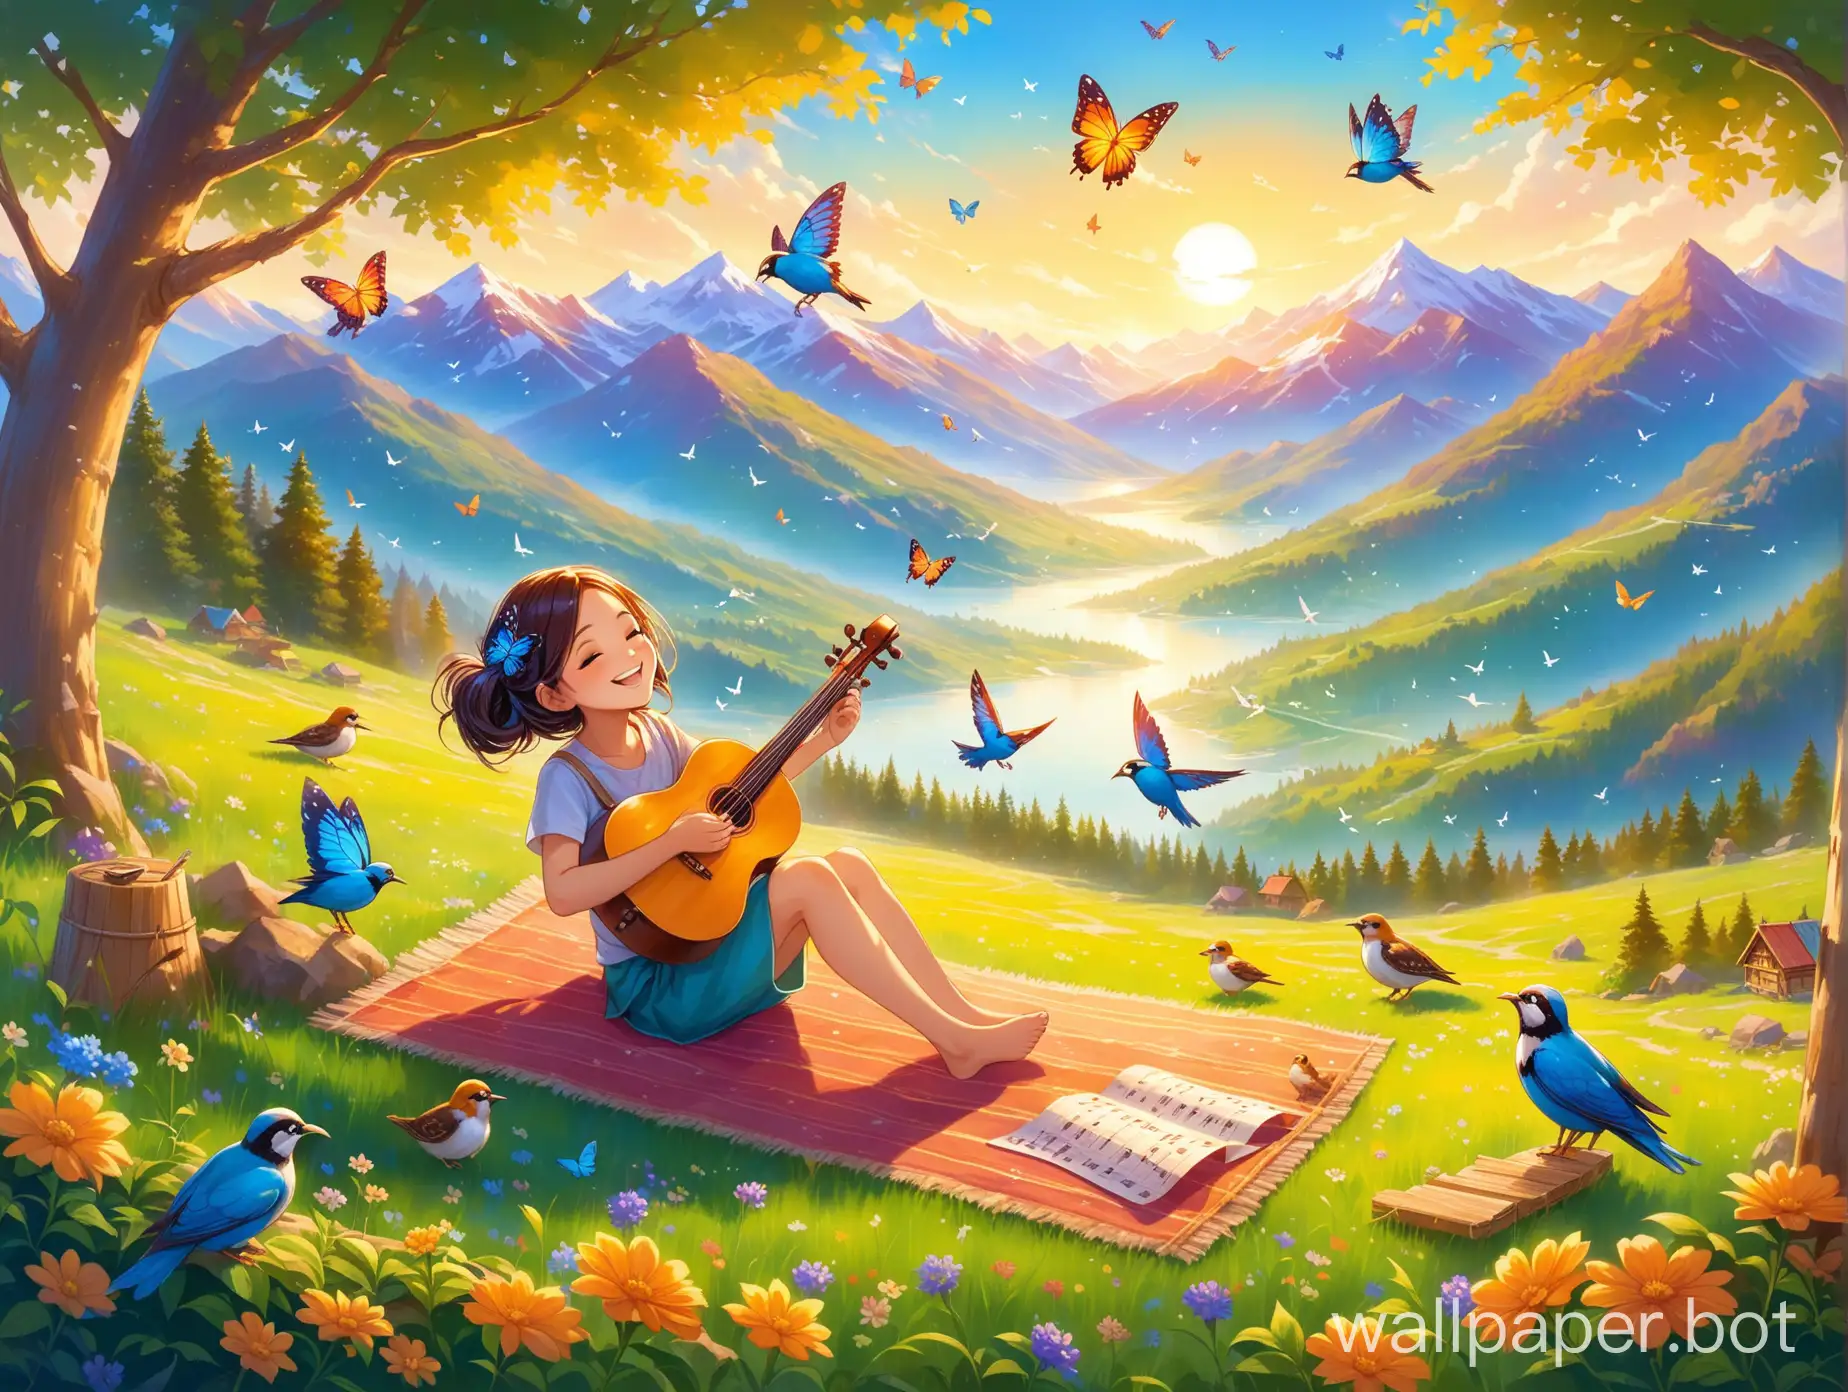 Boney-Enjoying-Nature-Relaxation-with-Melody-Birds-Mountains-and-Paints